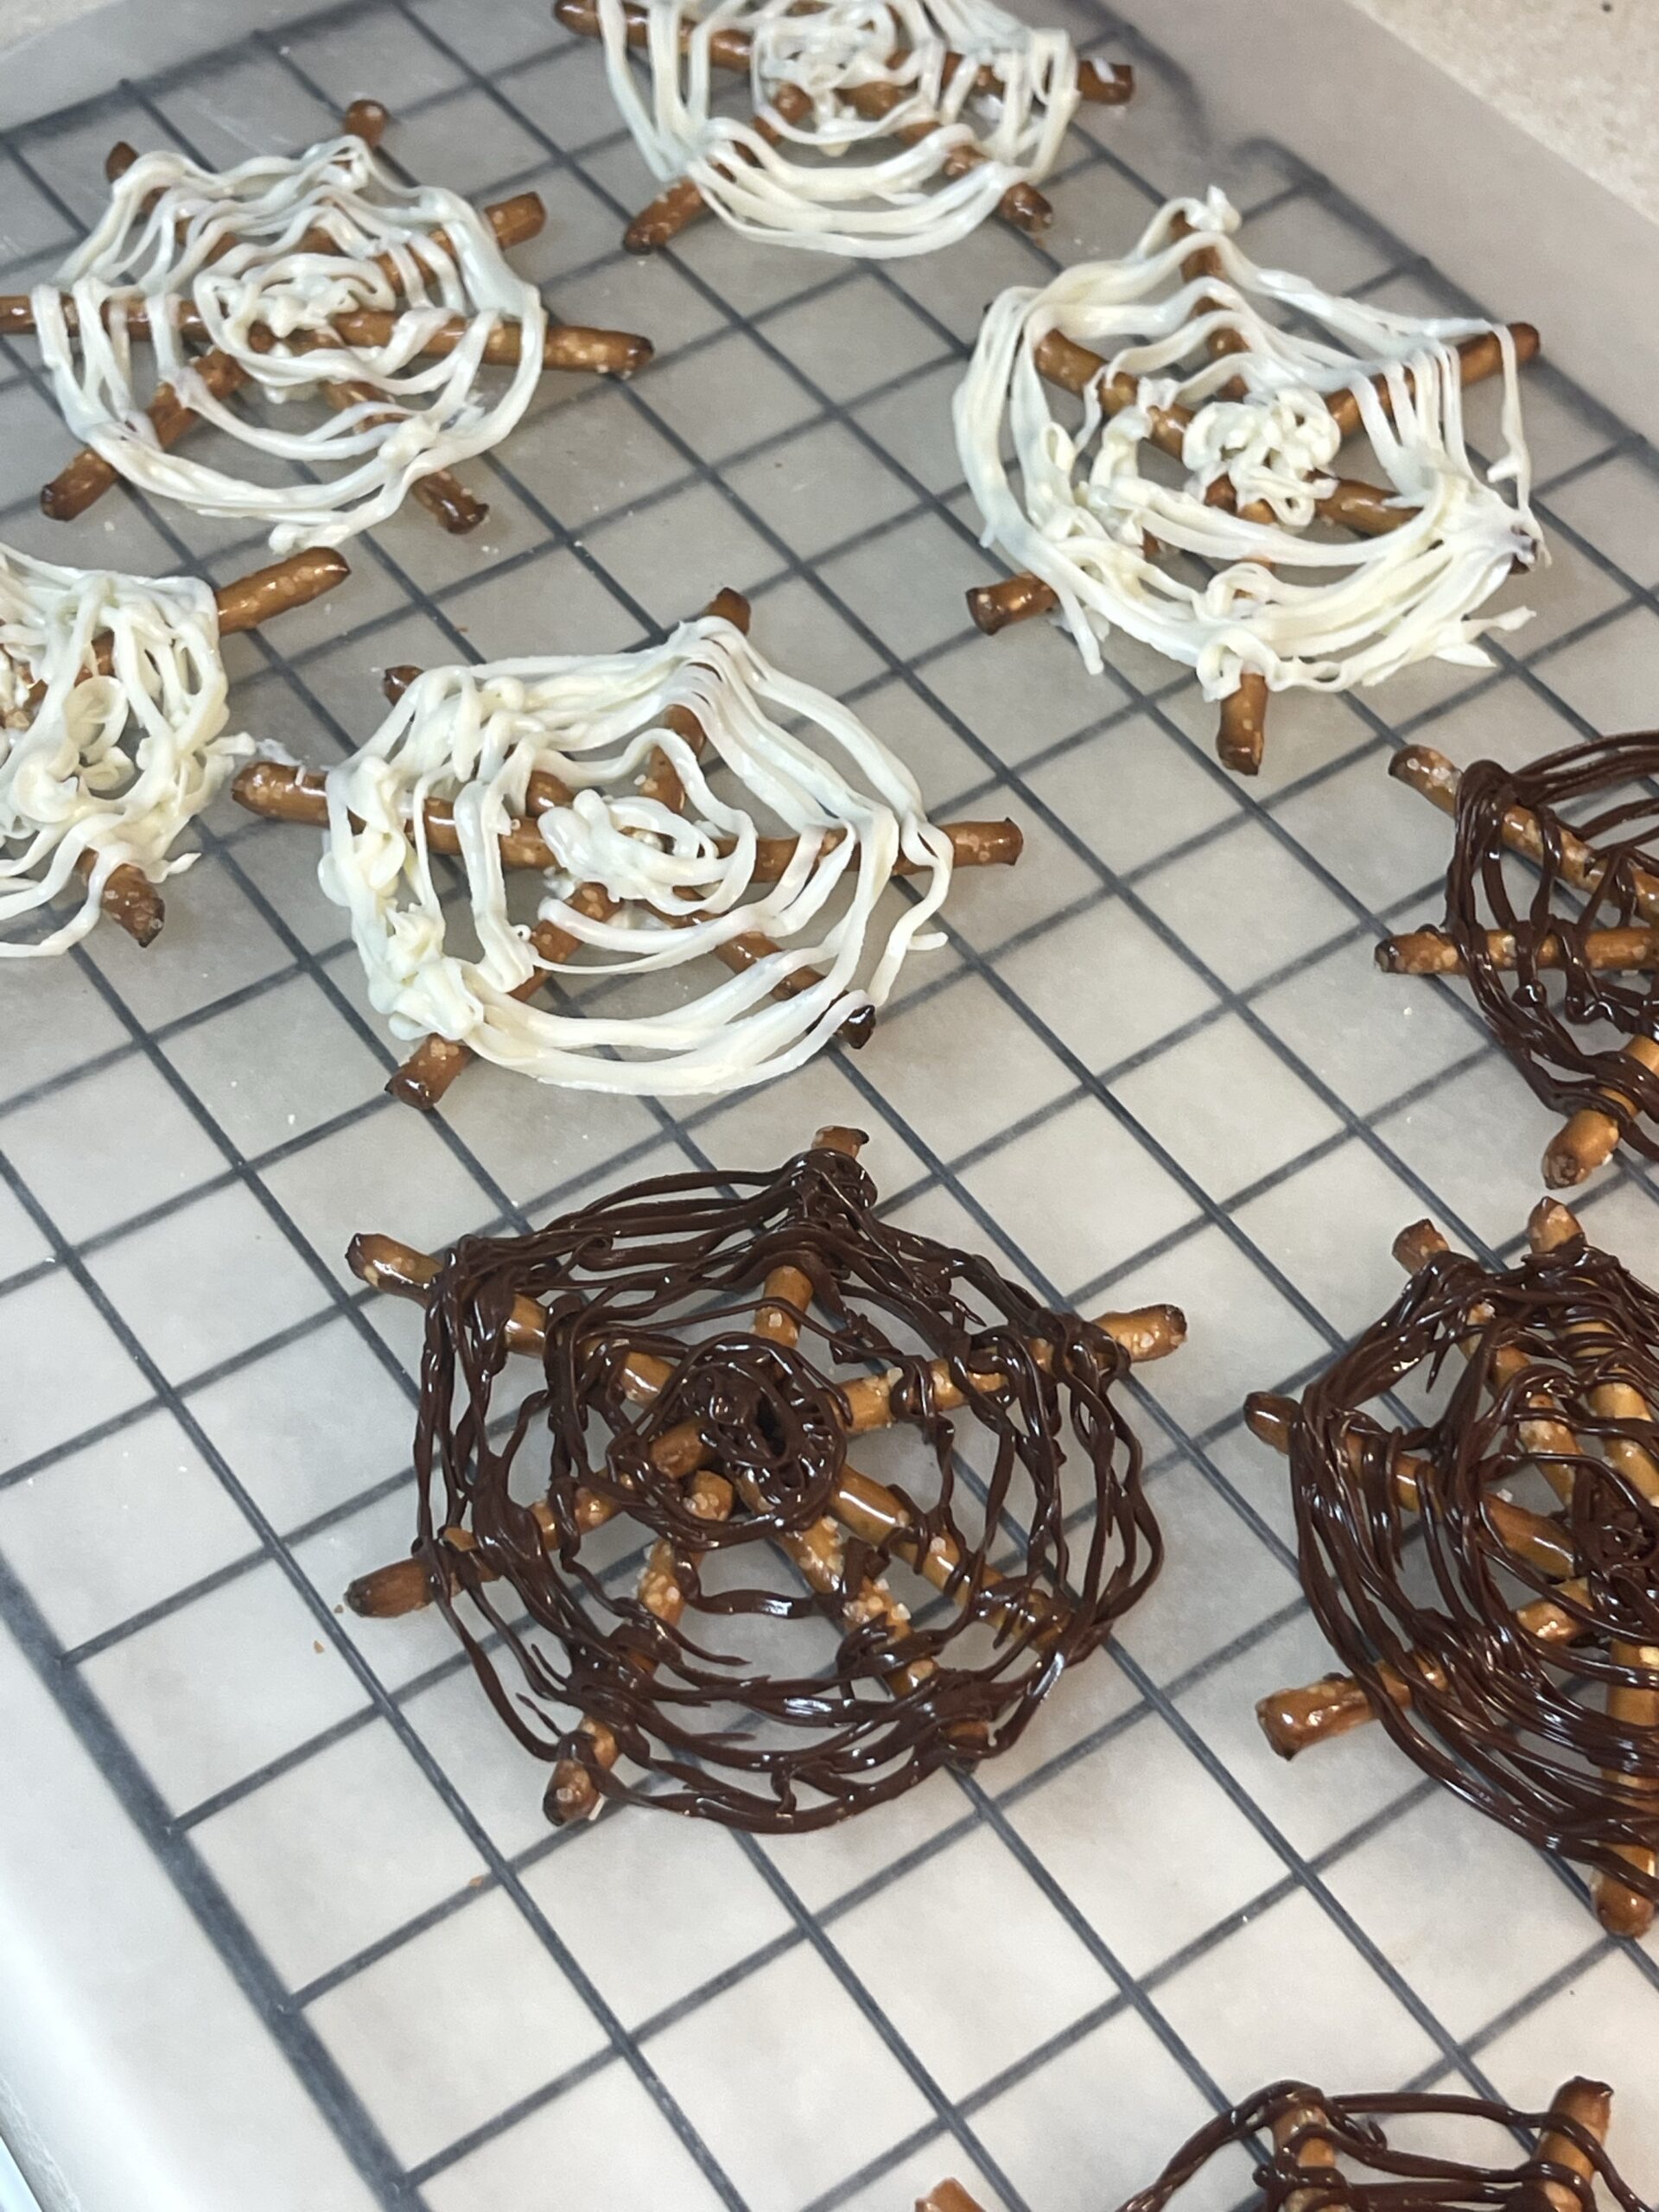 How to make Chocolate Spider webs